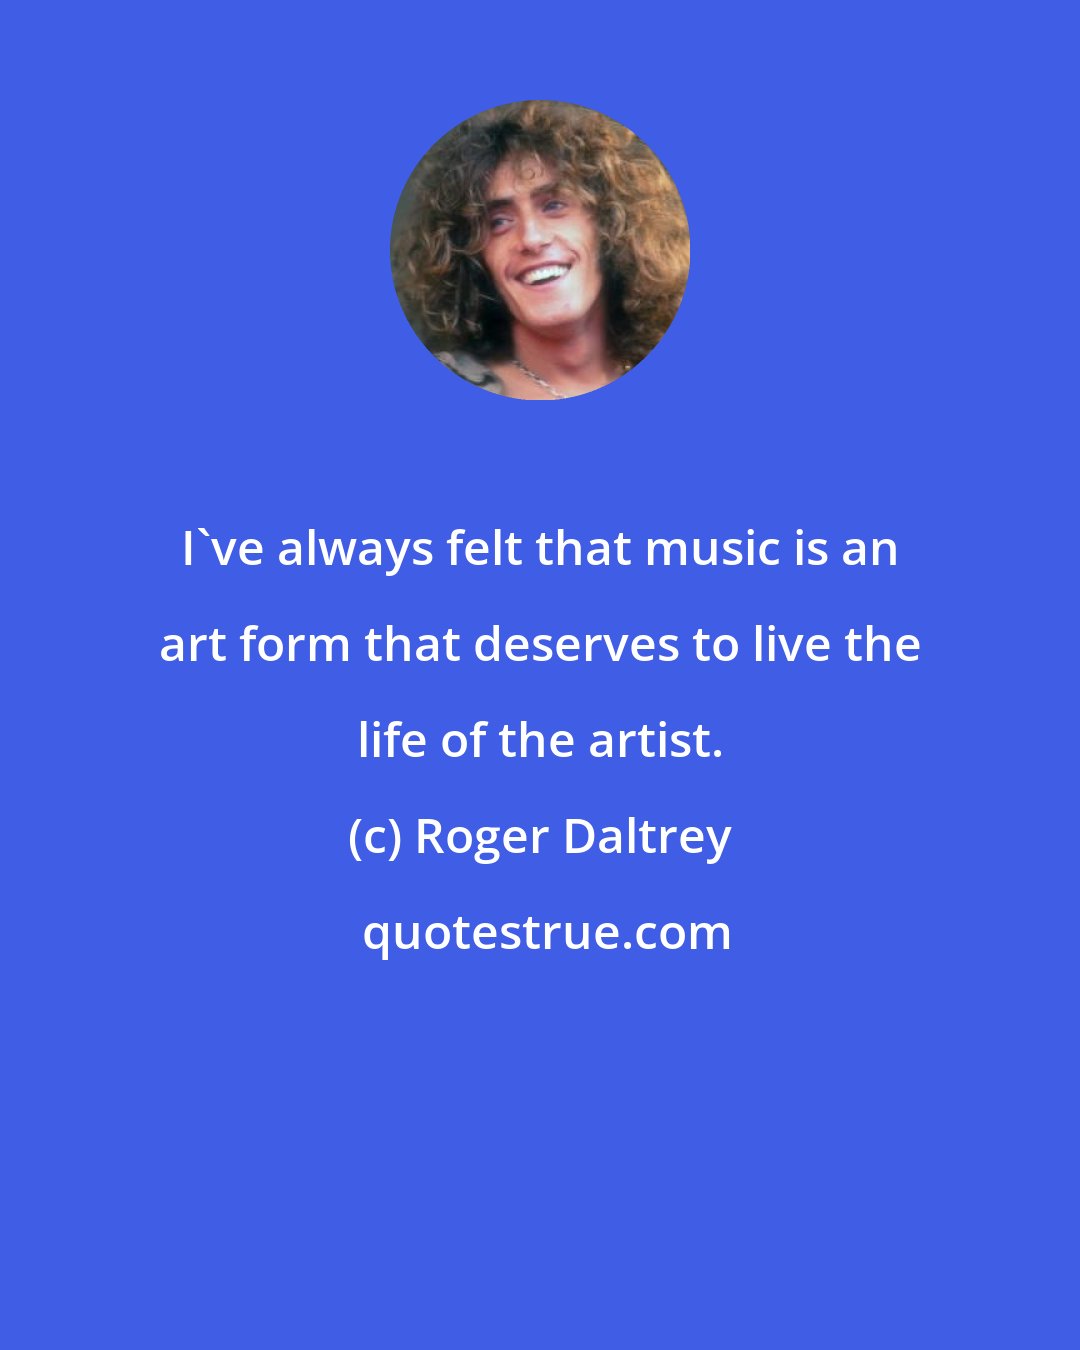 Roger Daltrey: I've always felt that music is an art form that deserves to live the life of the artist.